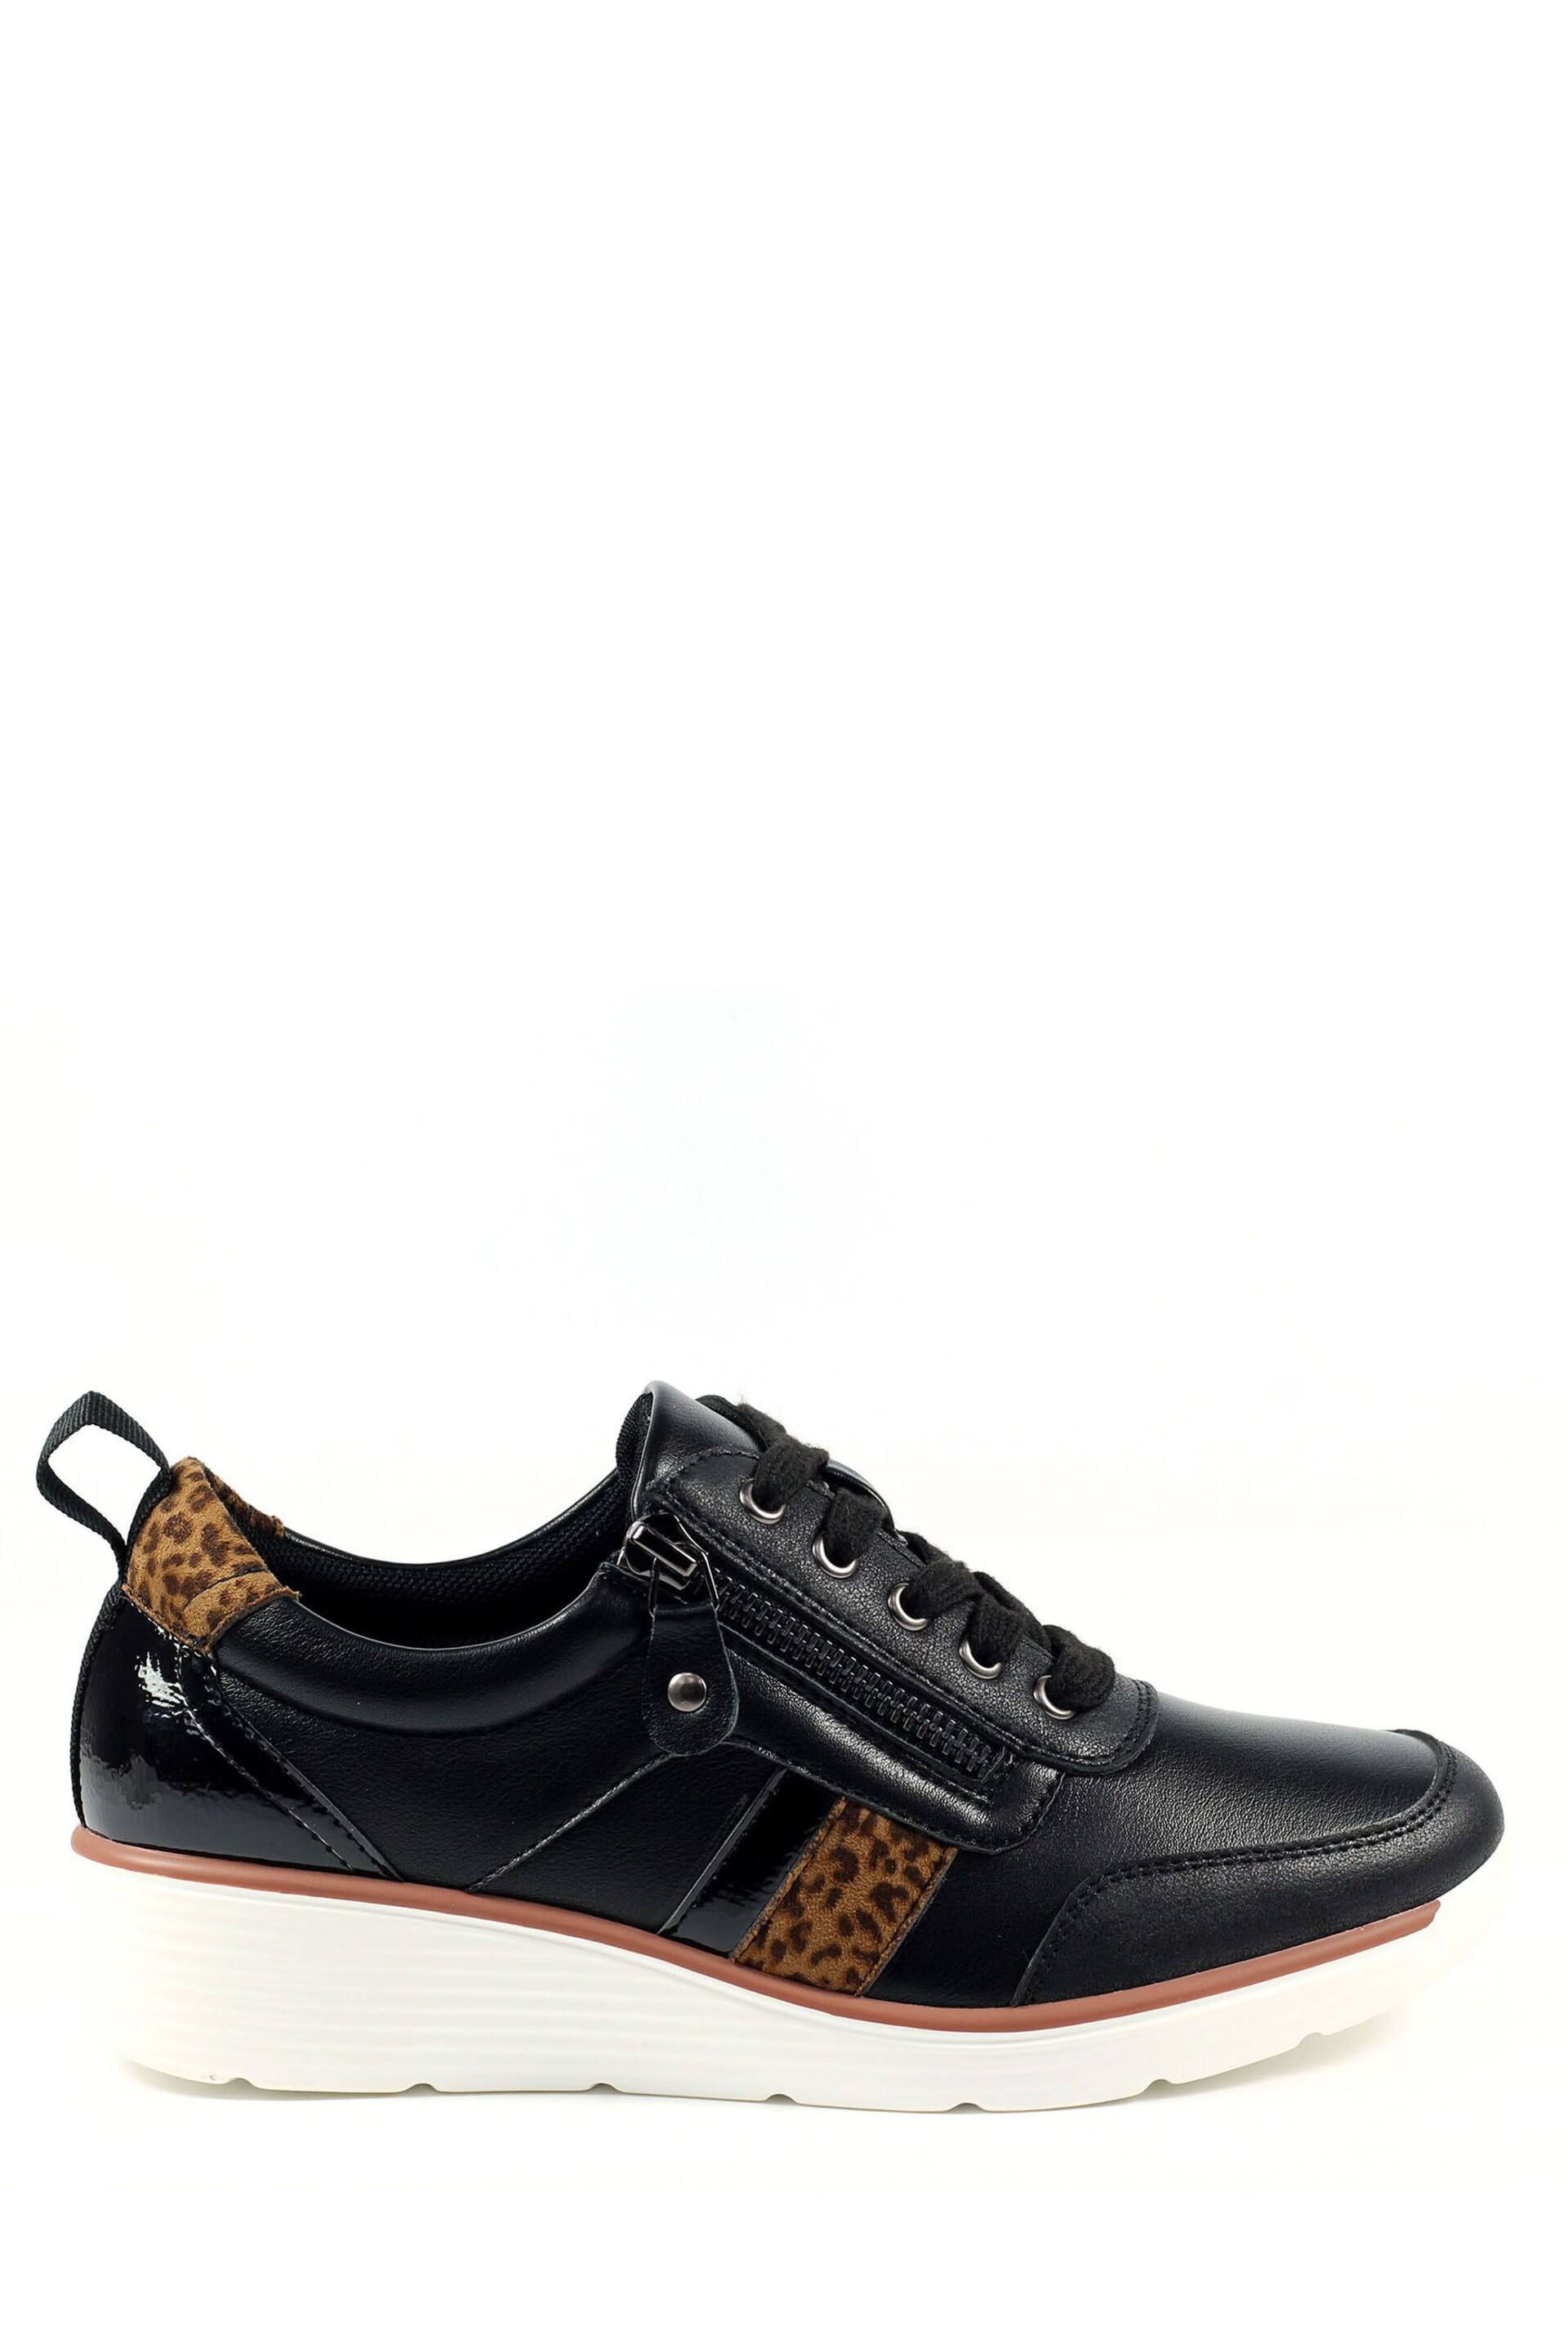 Lunar Rome Faux Leather Black Trainers - Image 3 of 8